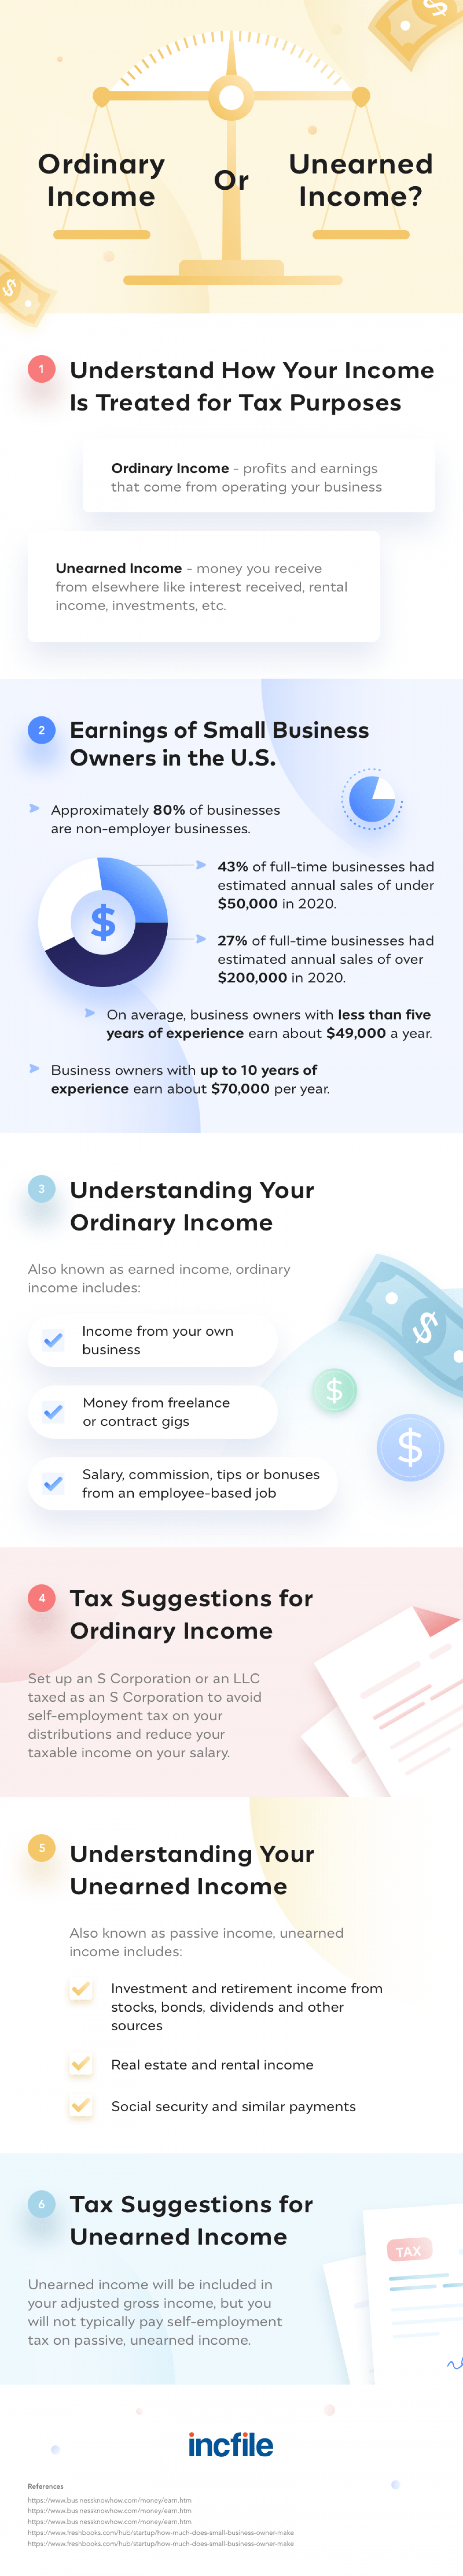 What Is Ordinary Income and How Is It Different From Earned Income? Infographic